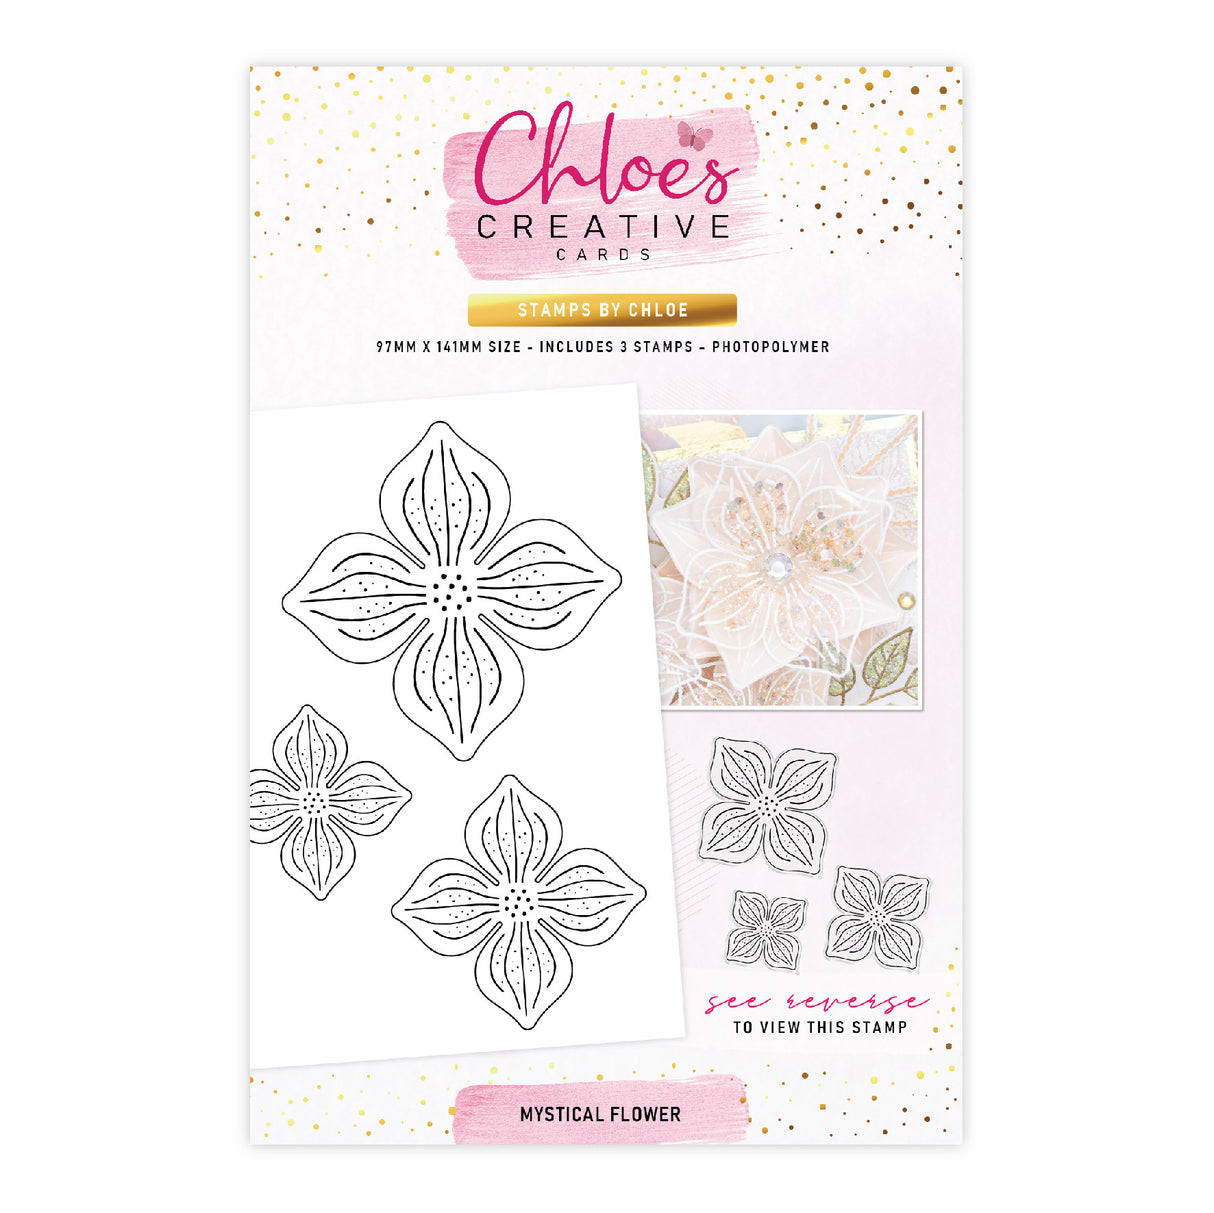 Chloes Creative Cards Photopolymer Stamp Set (A6) -  Mystical Flower